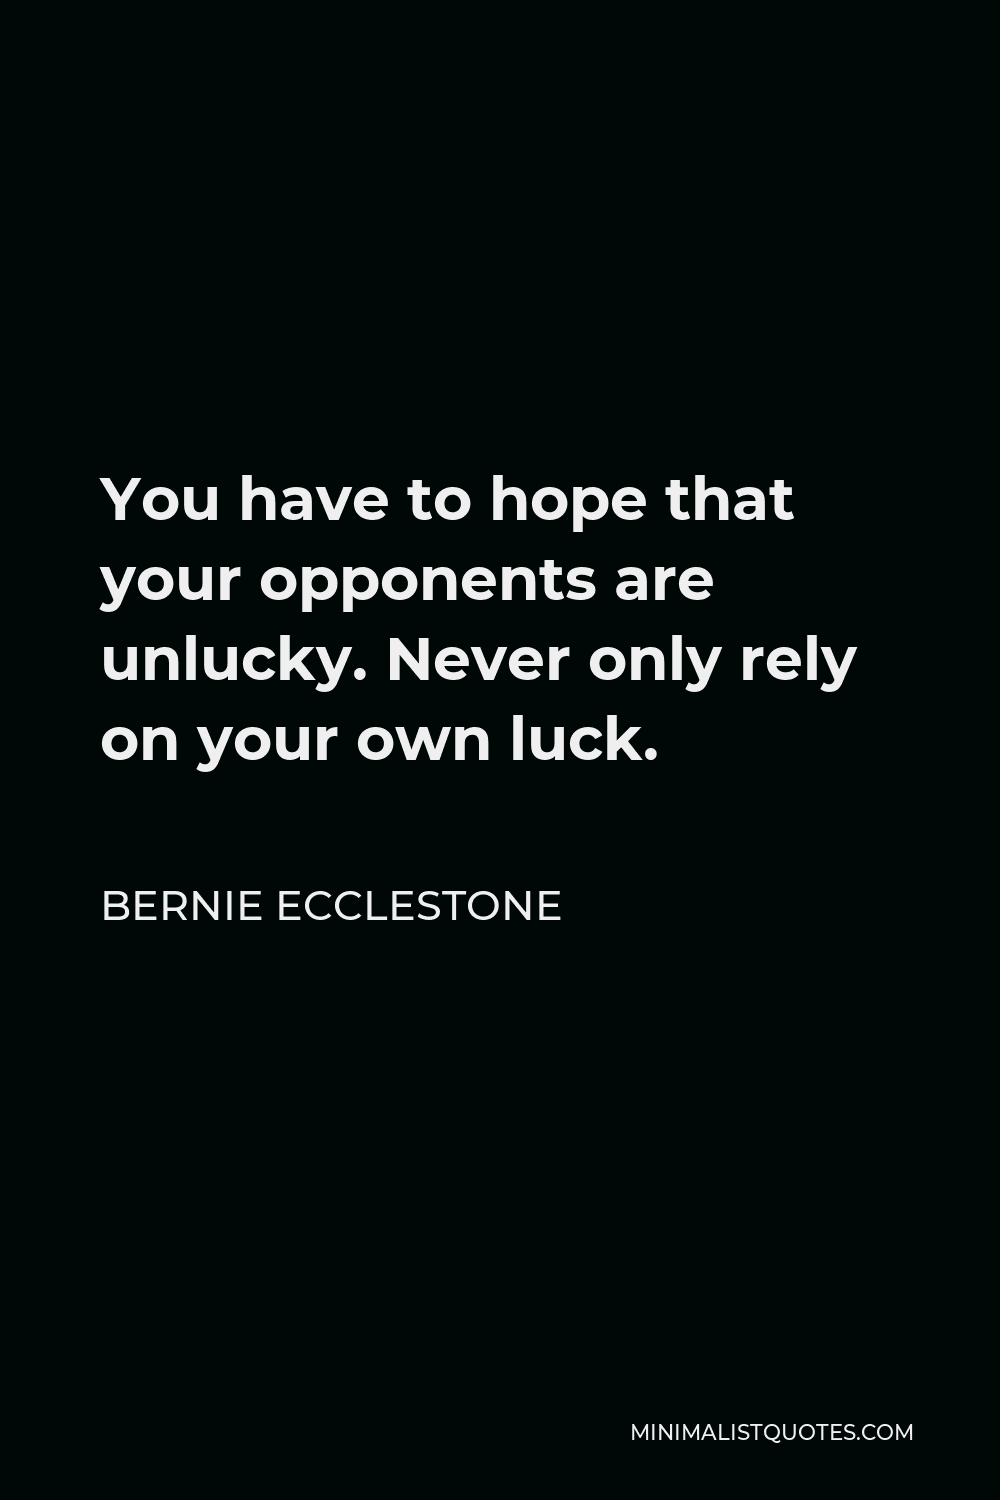 Bernie Ecclestone Quote - You have to hope that your opponents are unlucky. Never only rely on your own luck.